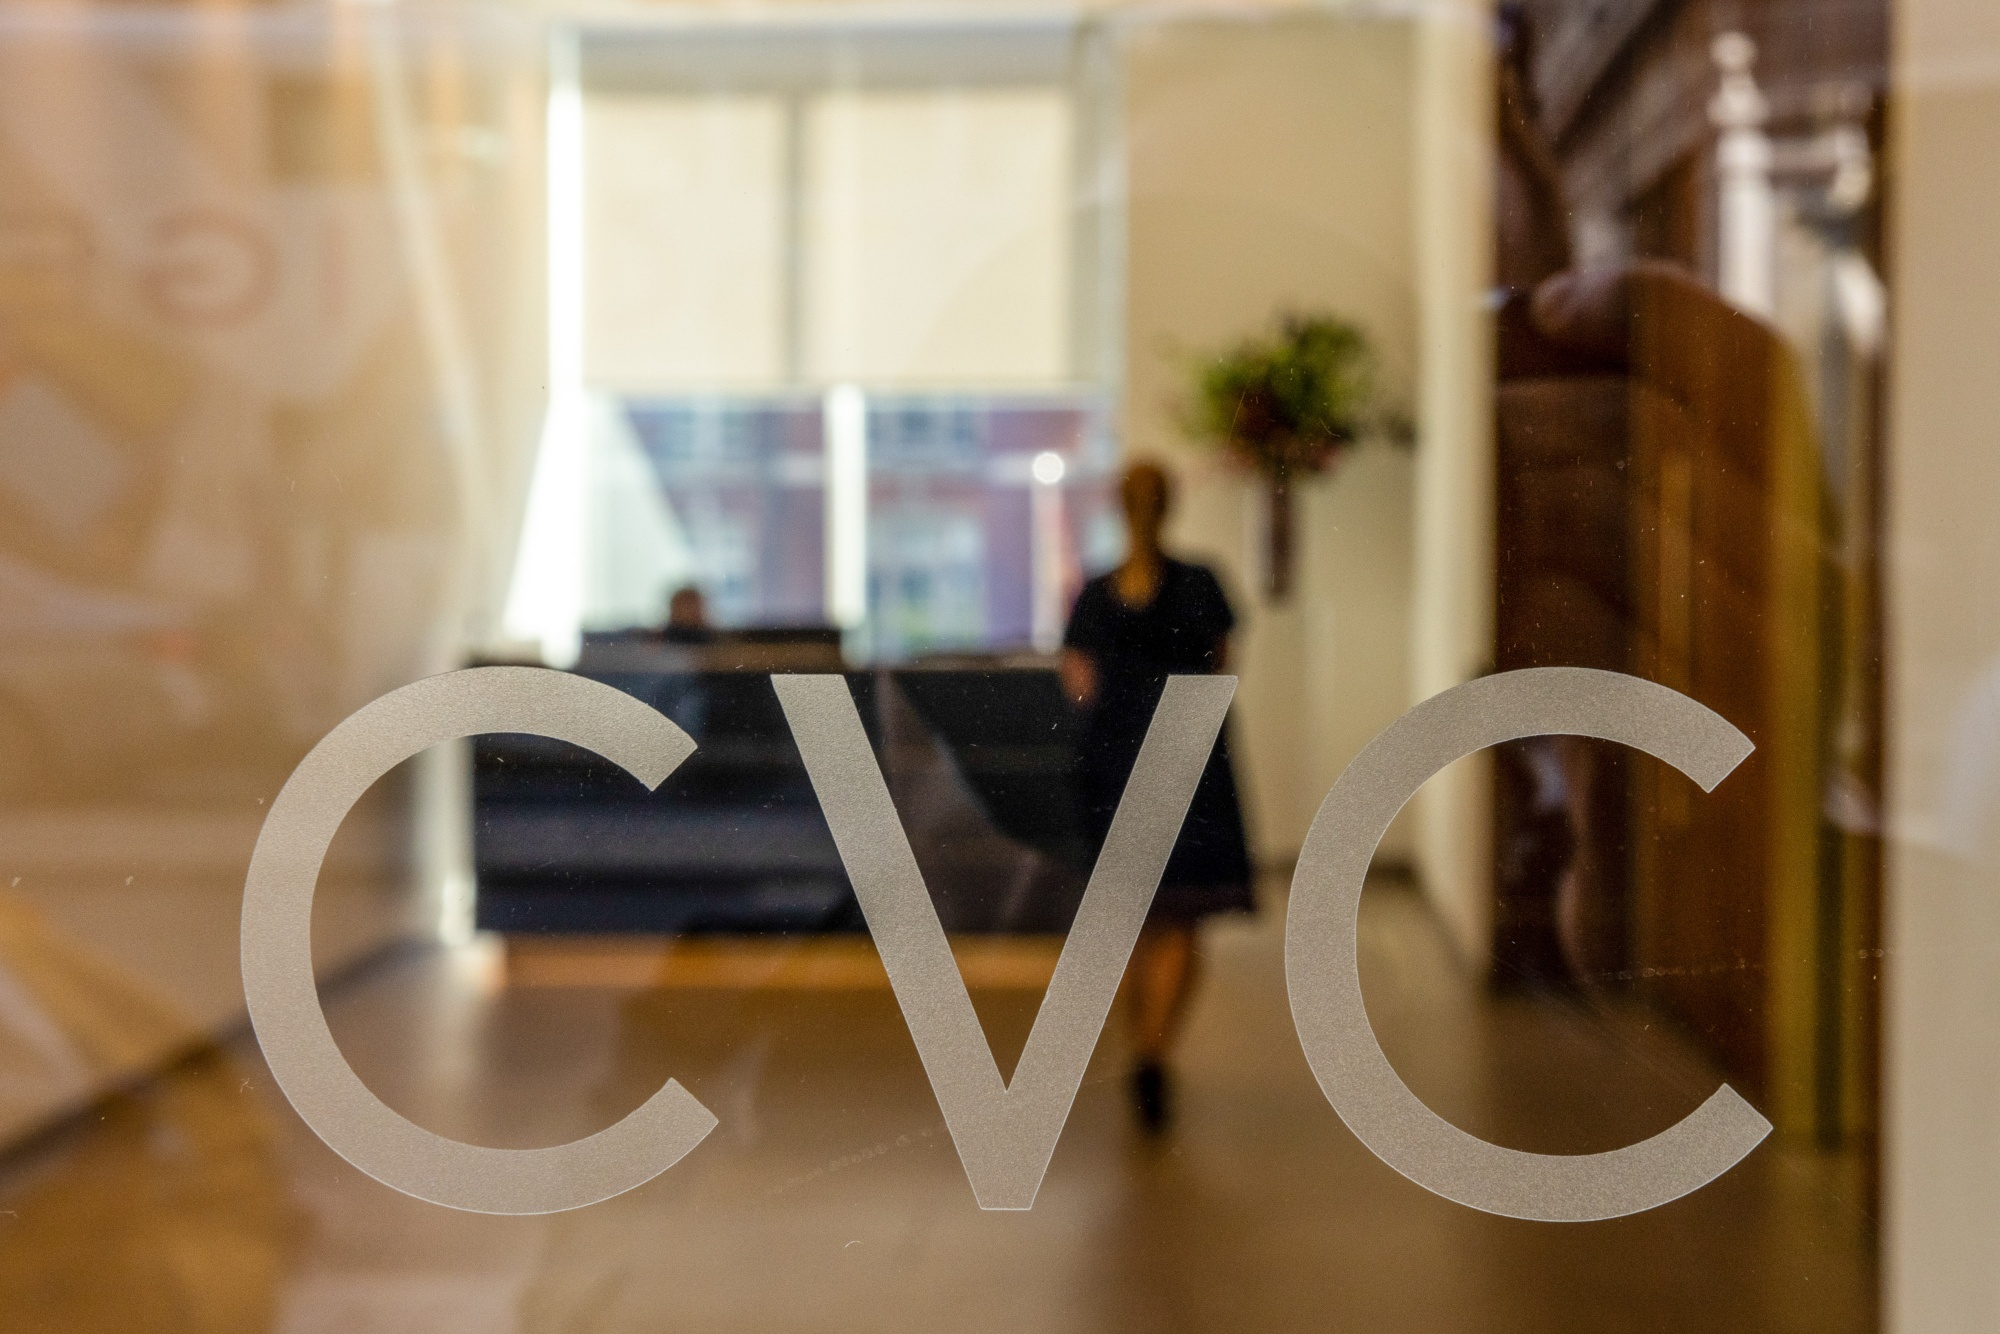 CVC Gears Up for Potential Listing as Soon as November - Bloomberg